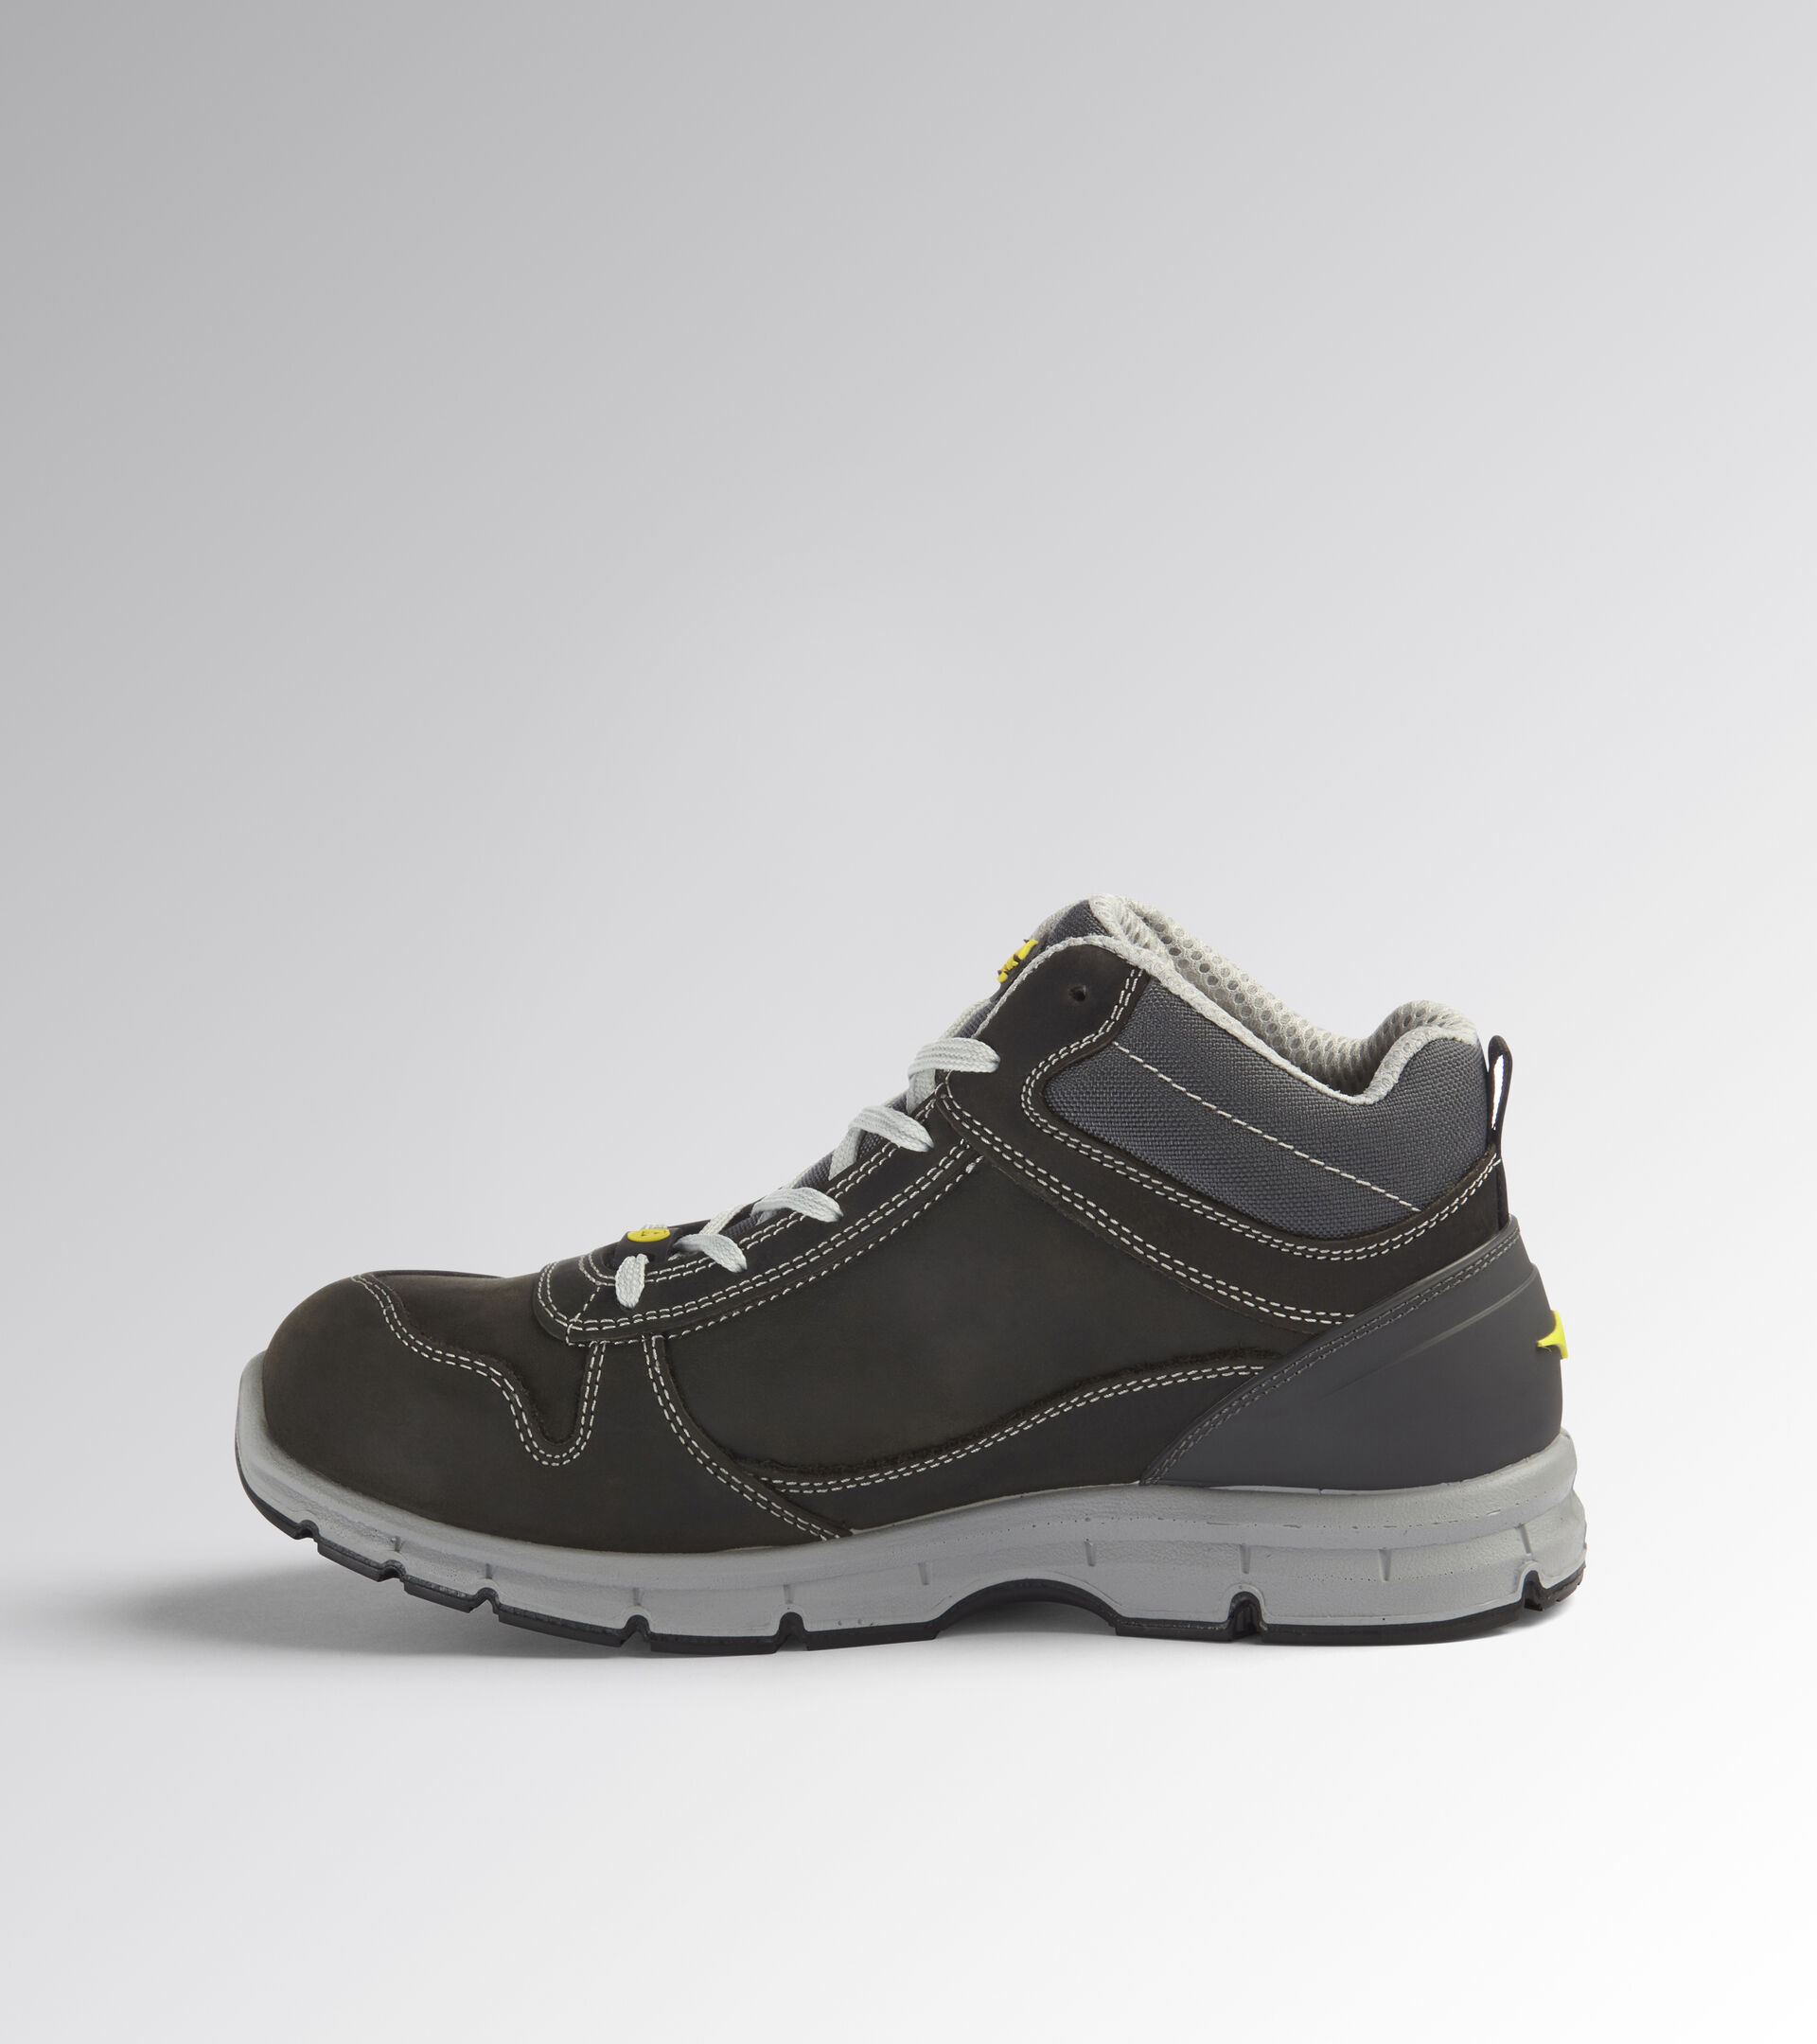 High safety shoe RUN MID S3 SRC ESD CASTLE ROCK - Utility